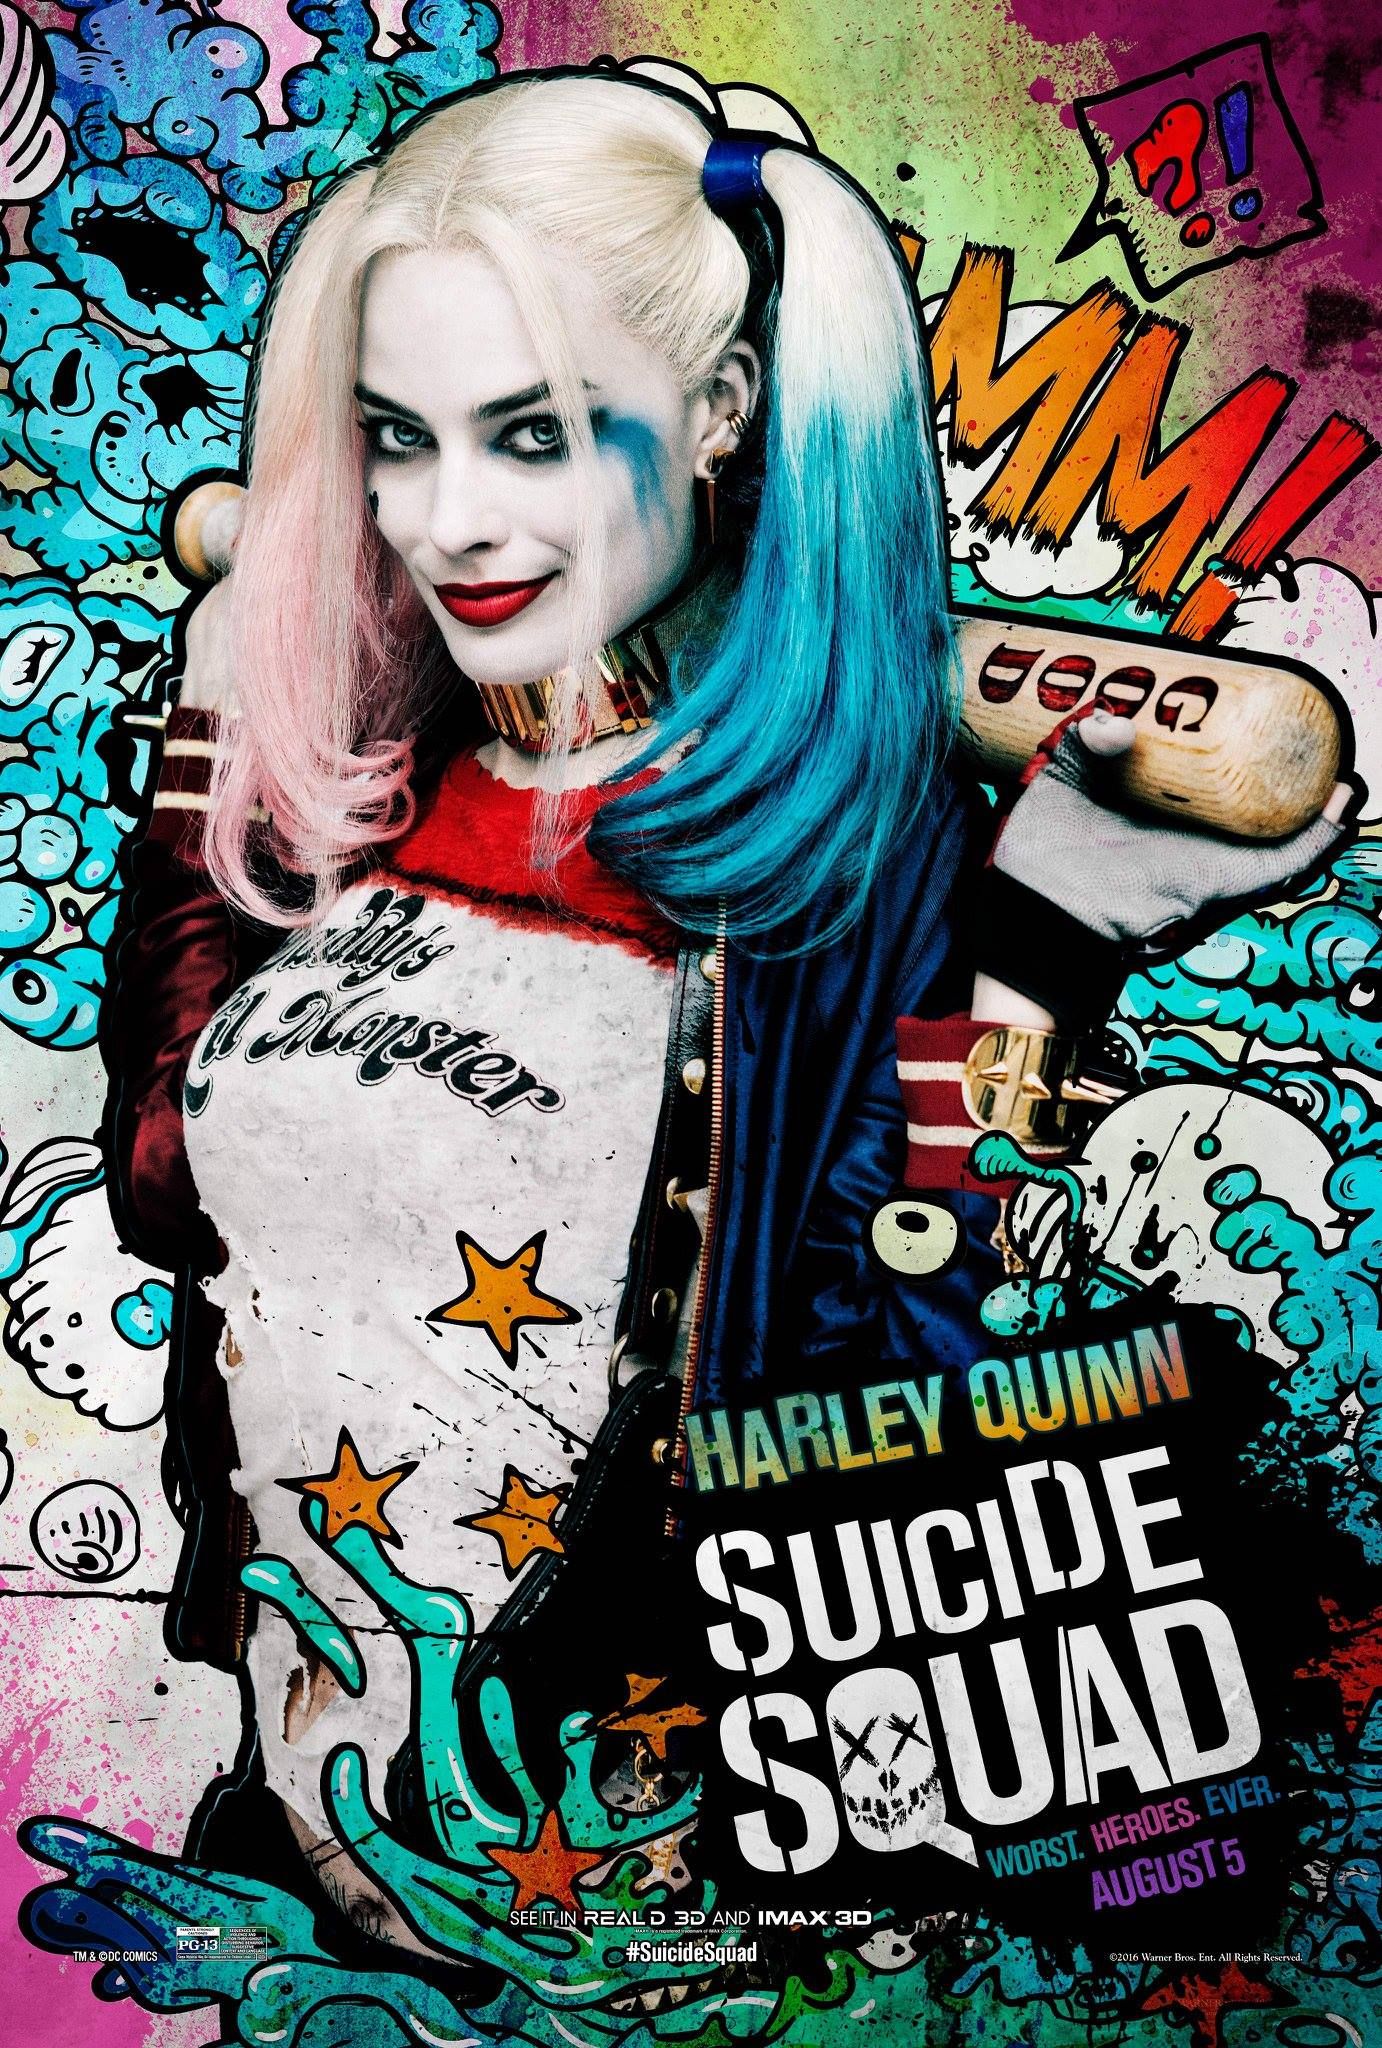 Suicide Squad Harley Quinn Comic Poster